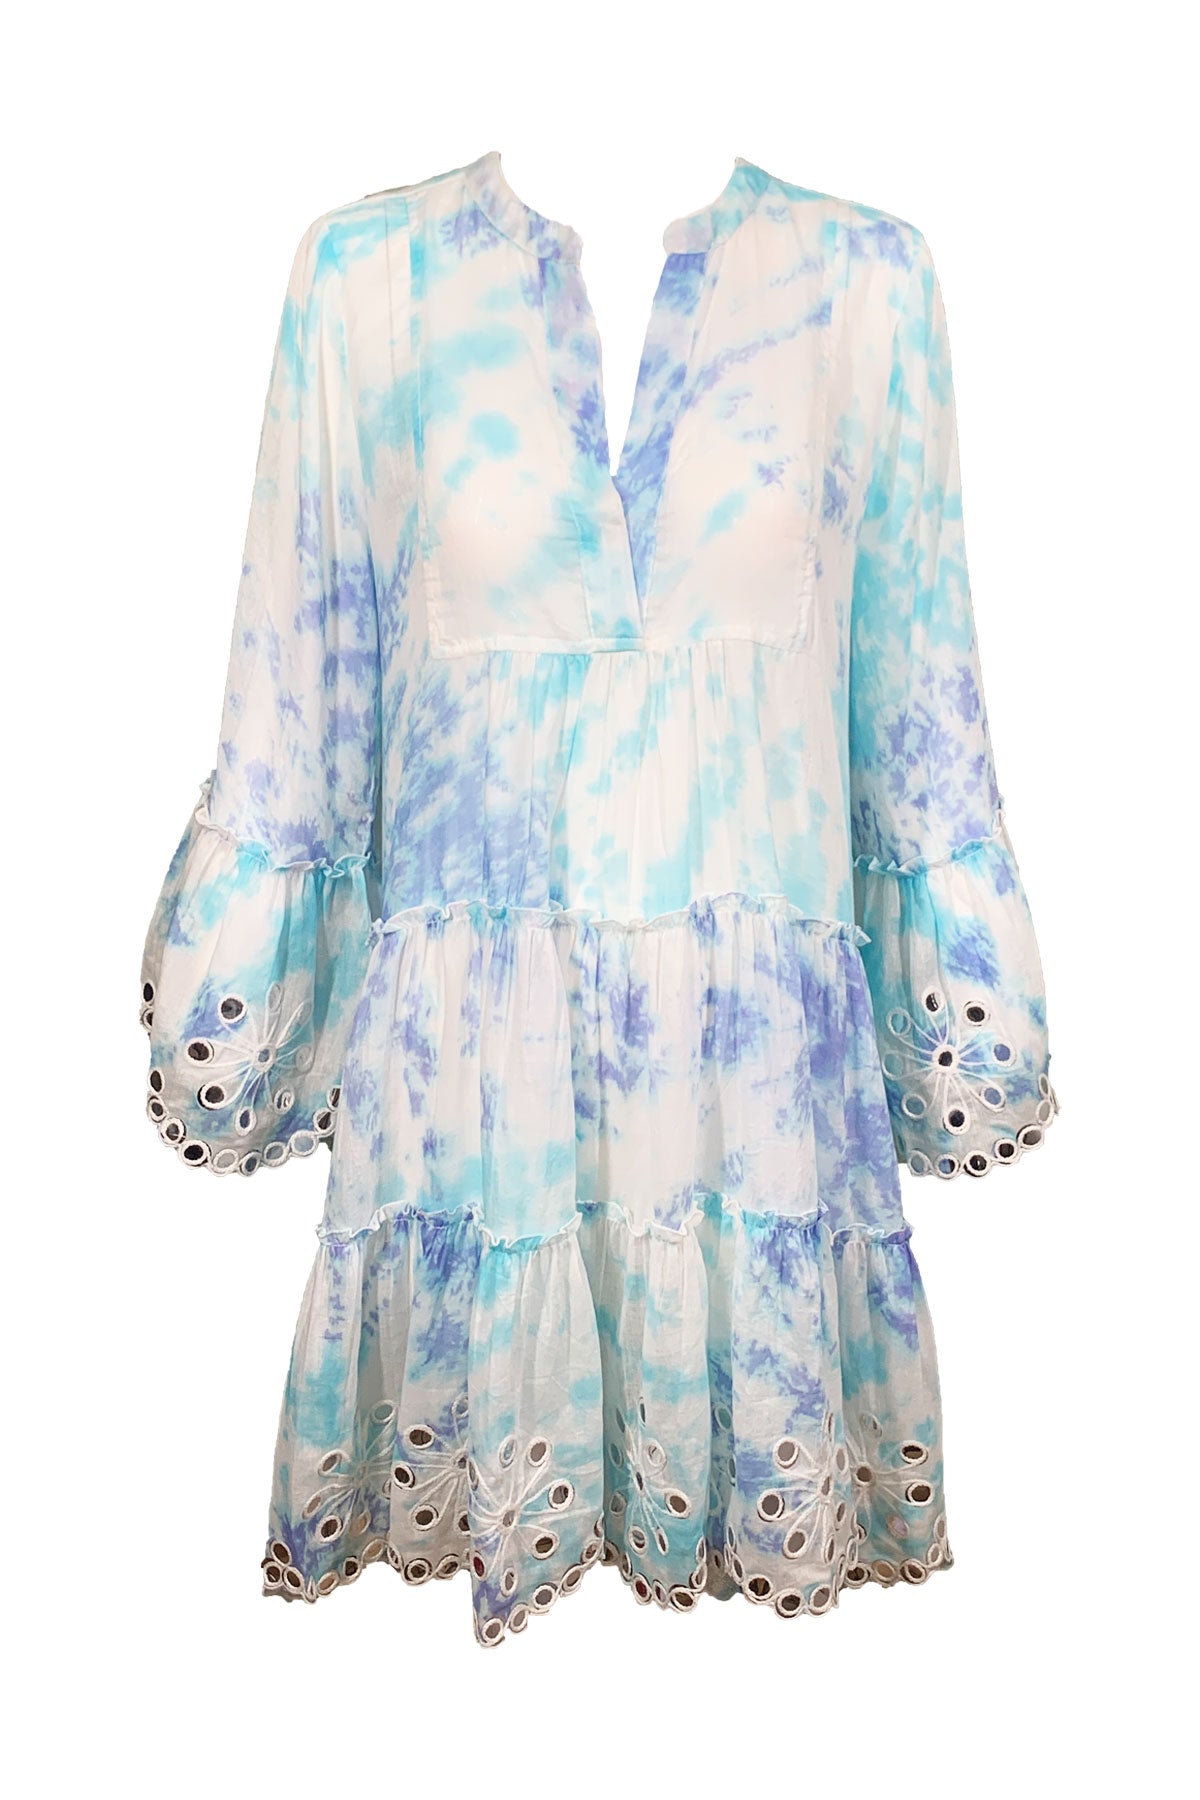 Spiral Tie Dye Flared Sleeve Dress with Mirrors Blue - shop-olivia.com